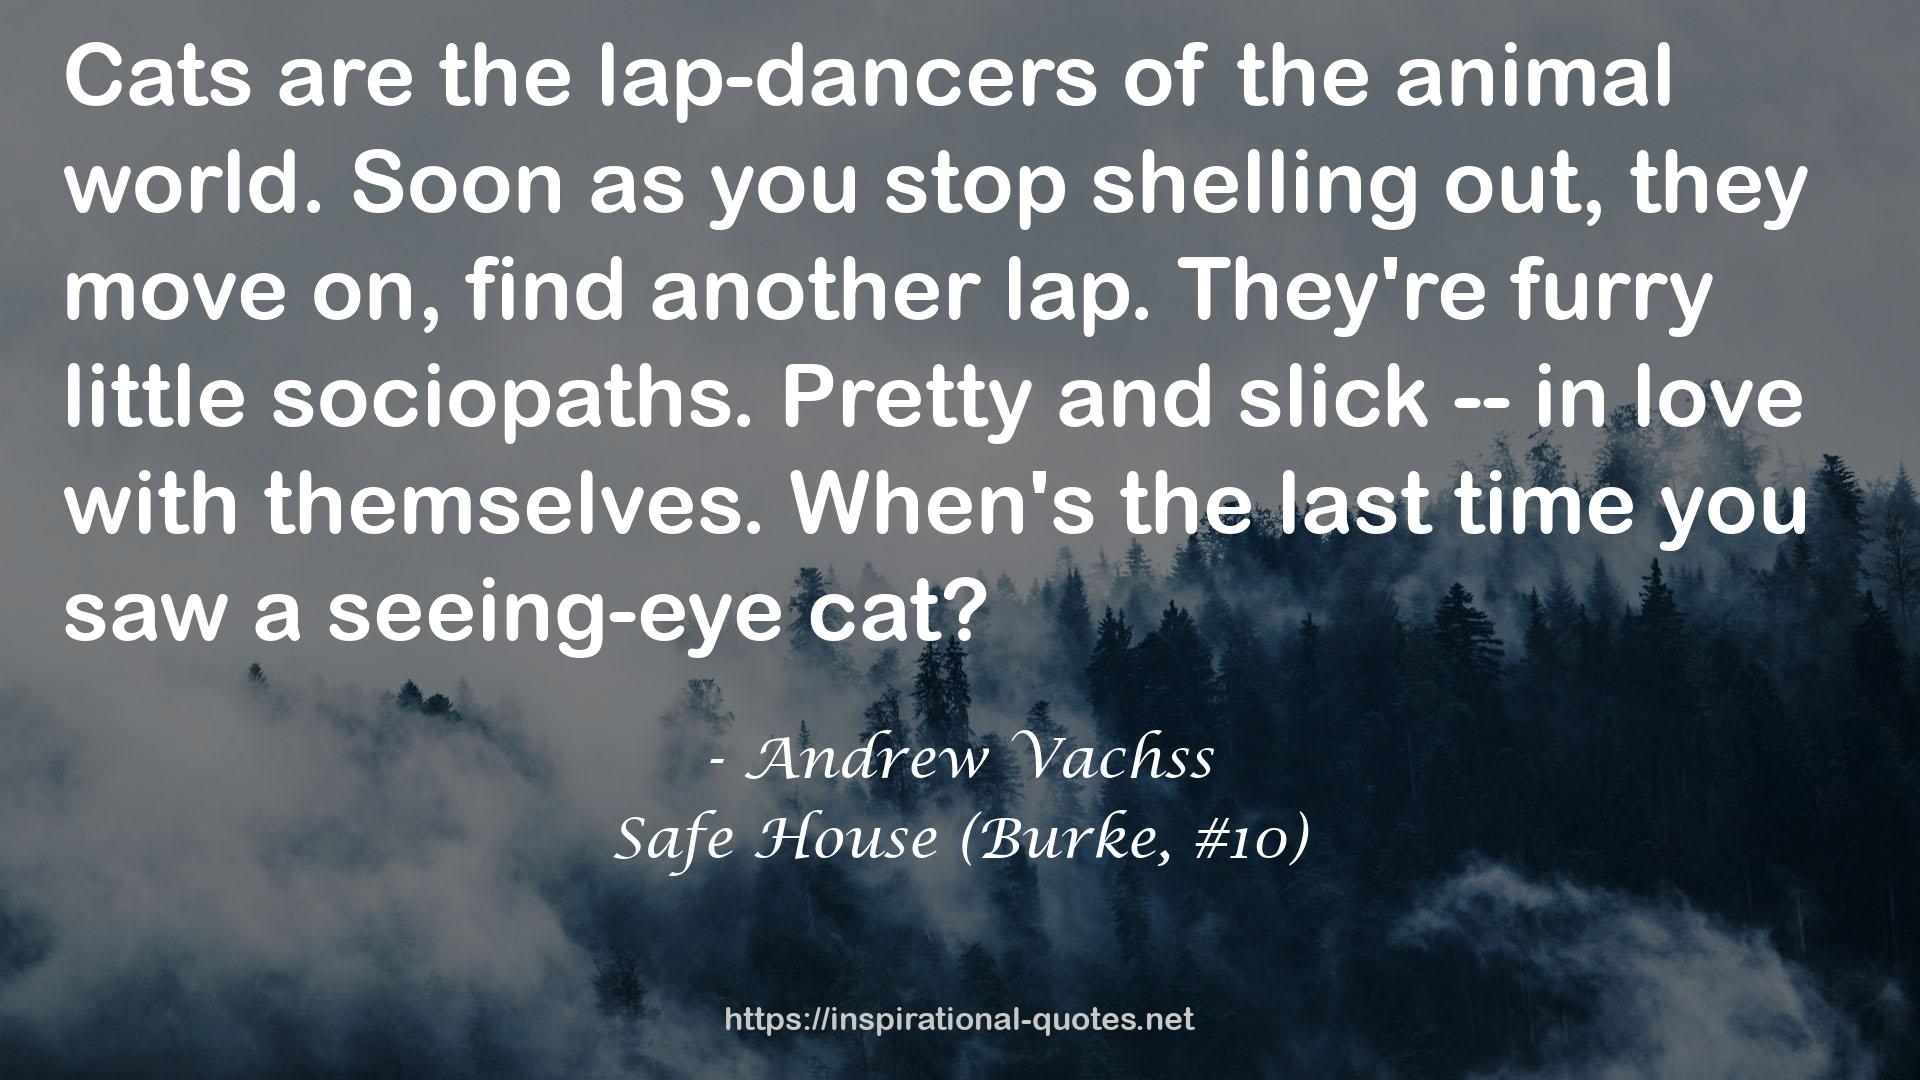 Safe House (Burke, #10) QUOTES